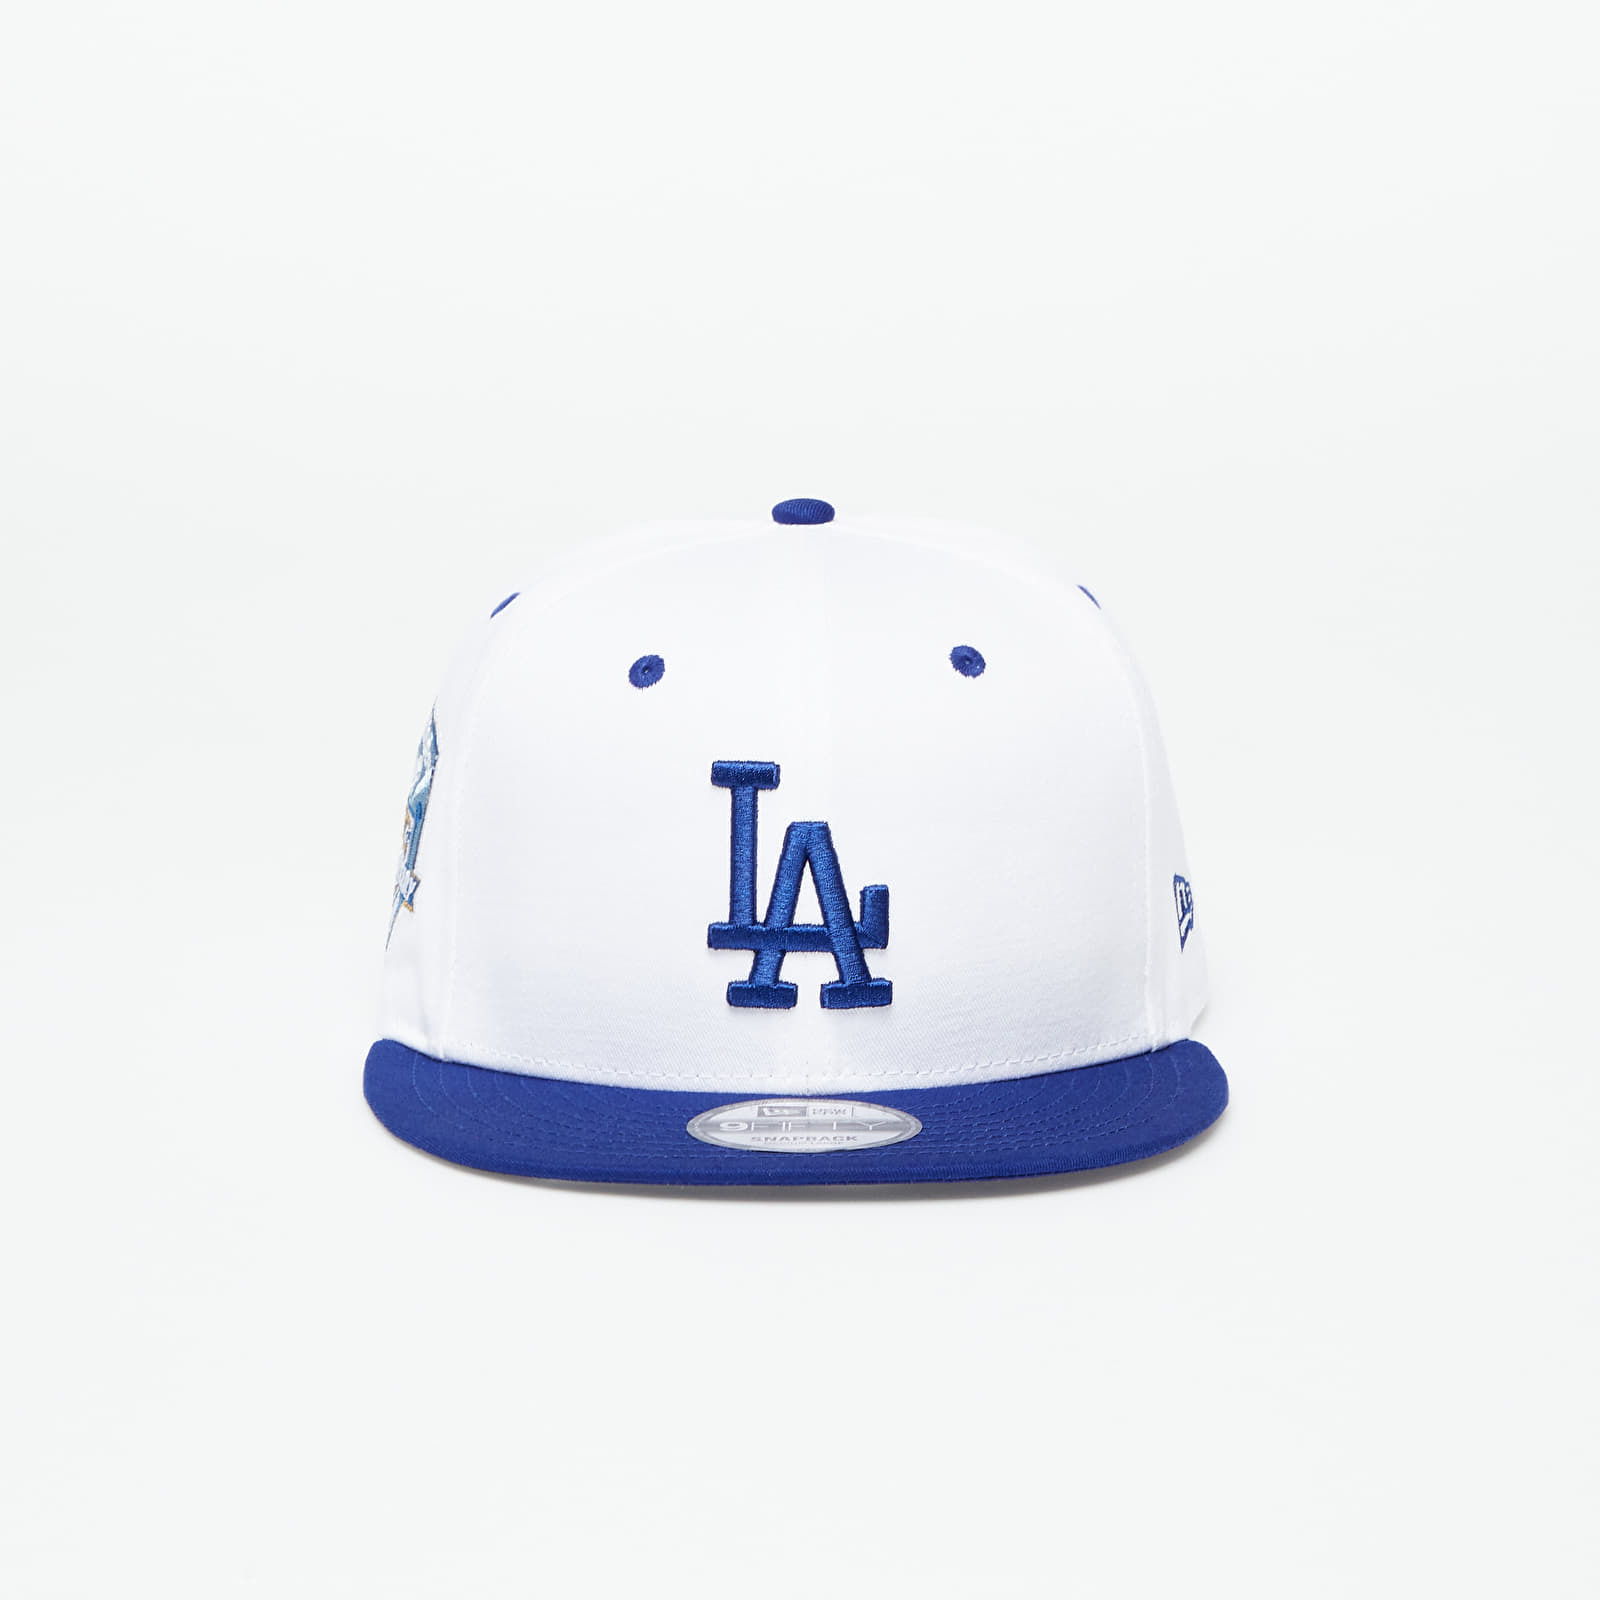 New Era - los angeles dodgers white crown patch 9fifty snapback cap optic white/ light royal/ bright royal